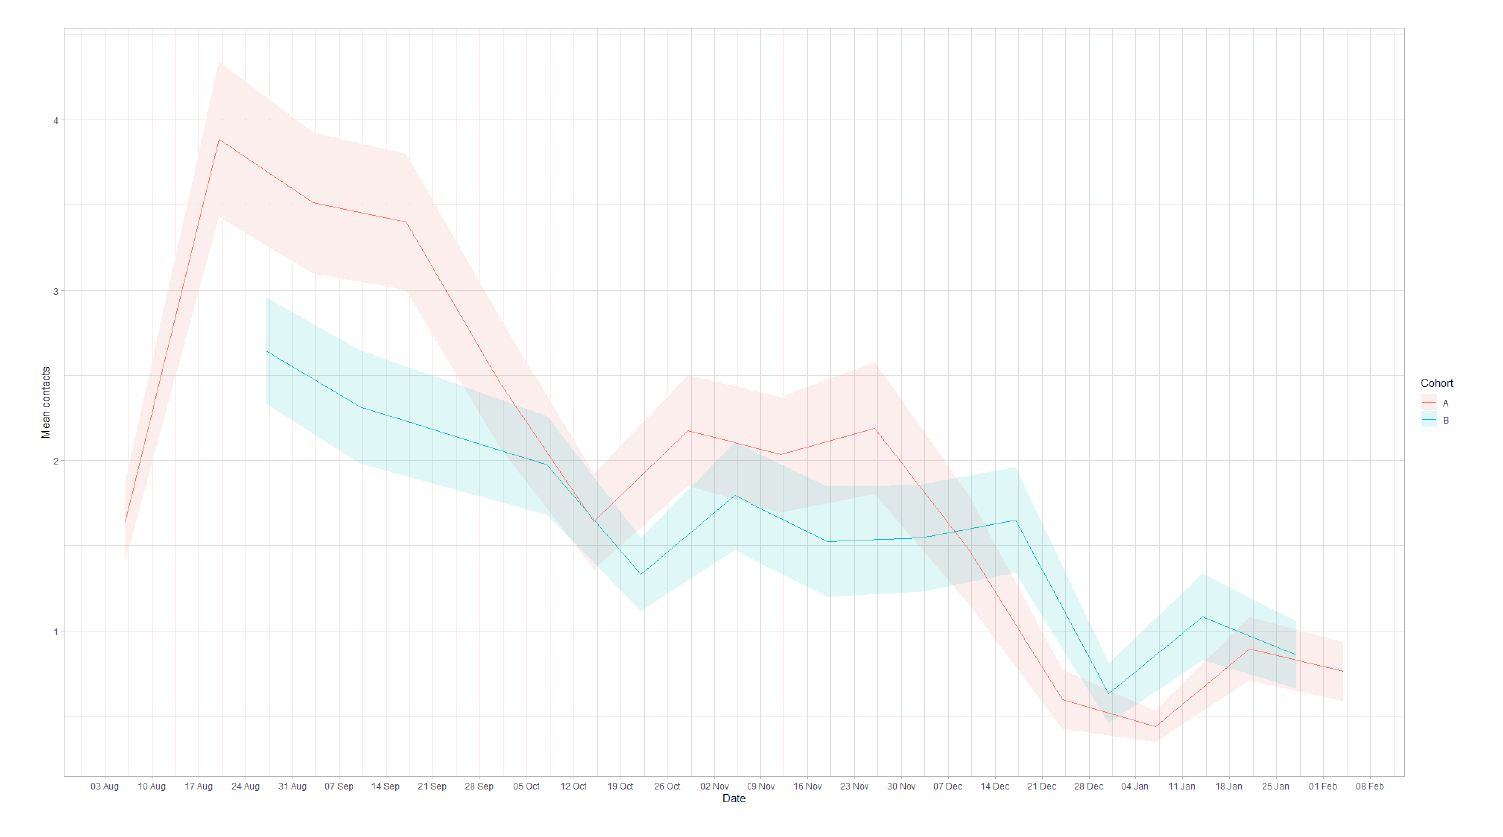 A line graph showing mean adult contacts by age group for panel A and panel B in the work setting from 6 Aug to 10 Feb.